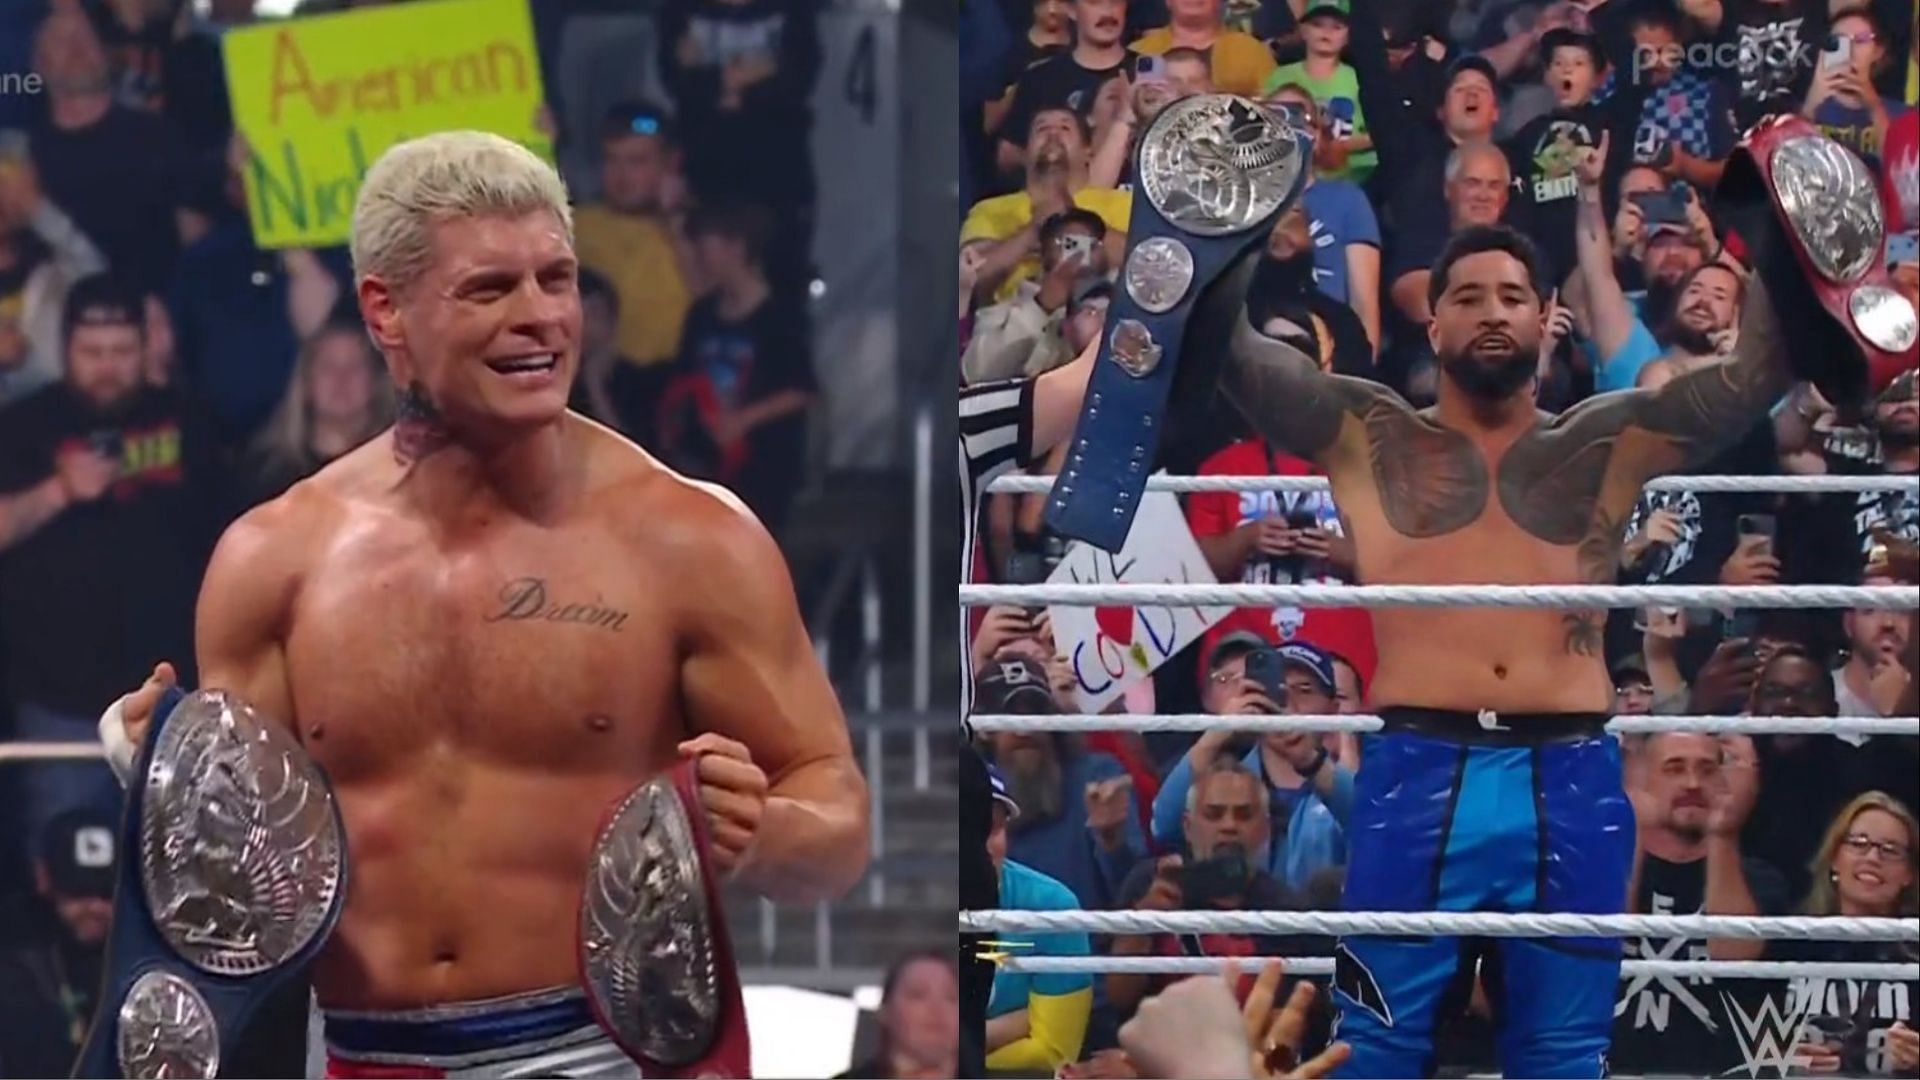 Cody Rhodes and Jey Uso celebrate after winning tag team titles at WWE Fastlane.